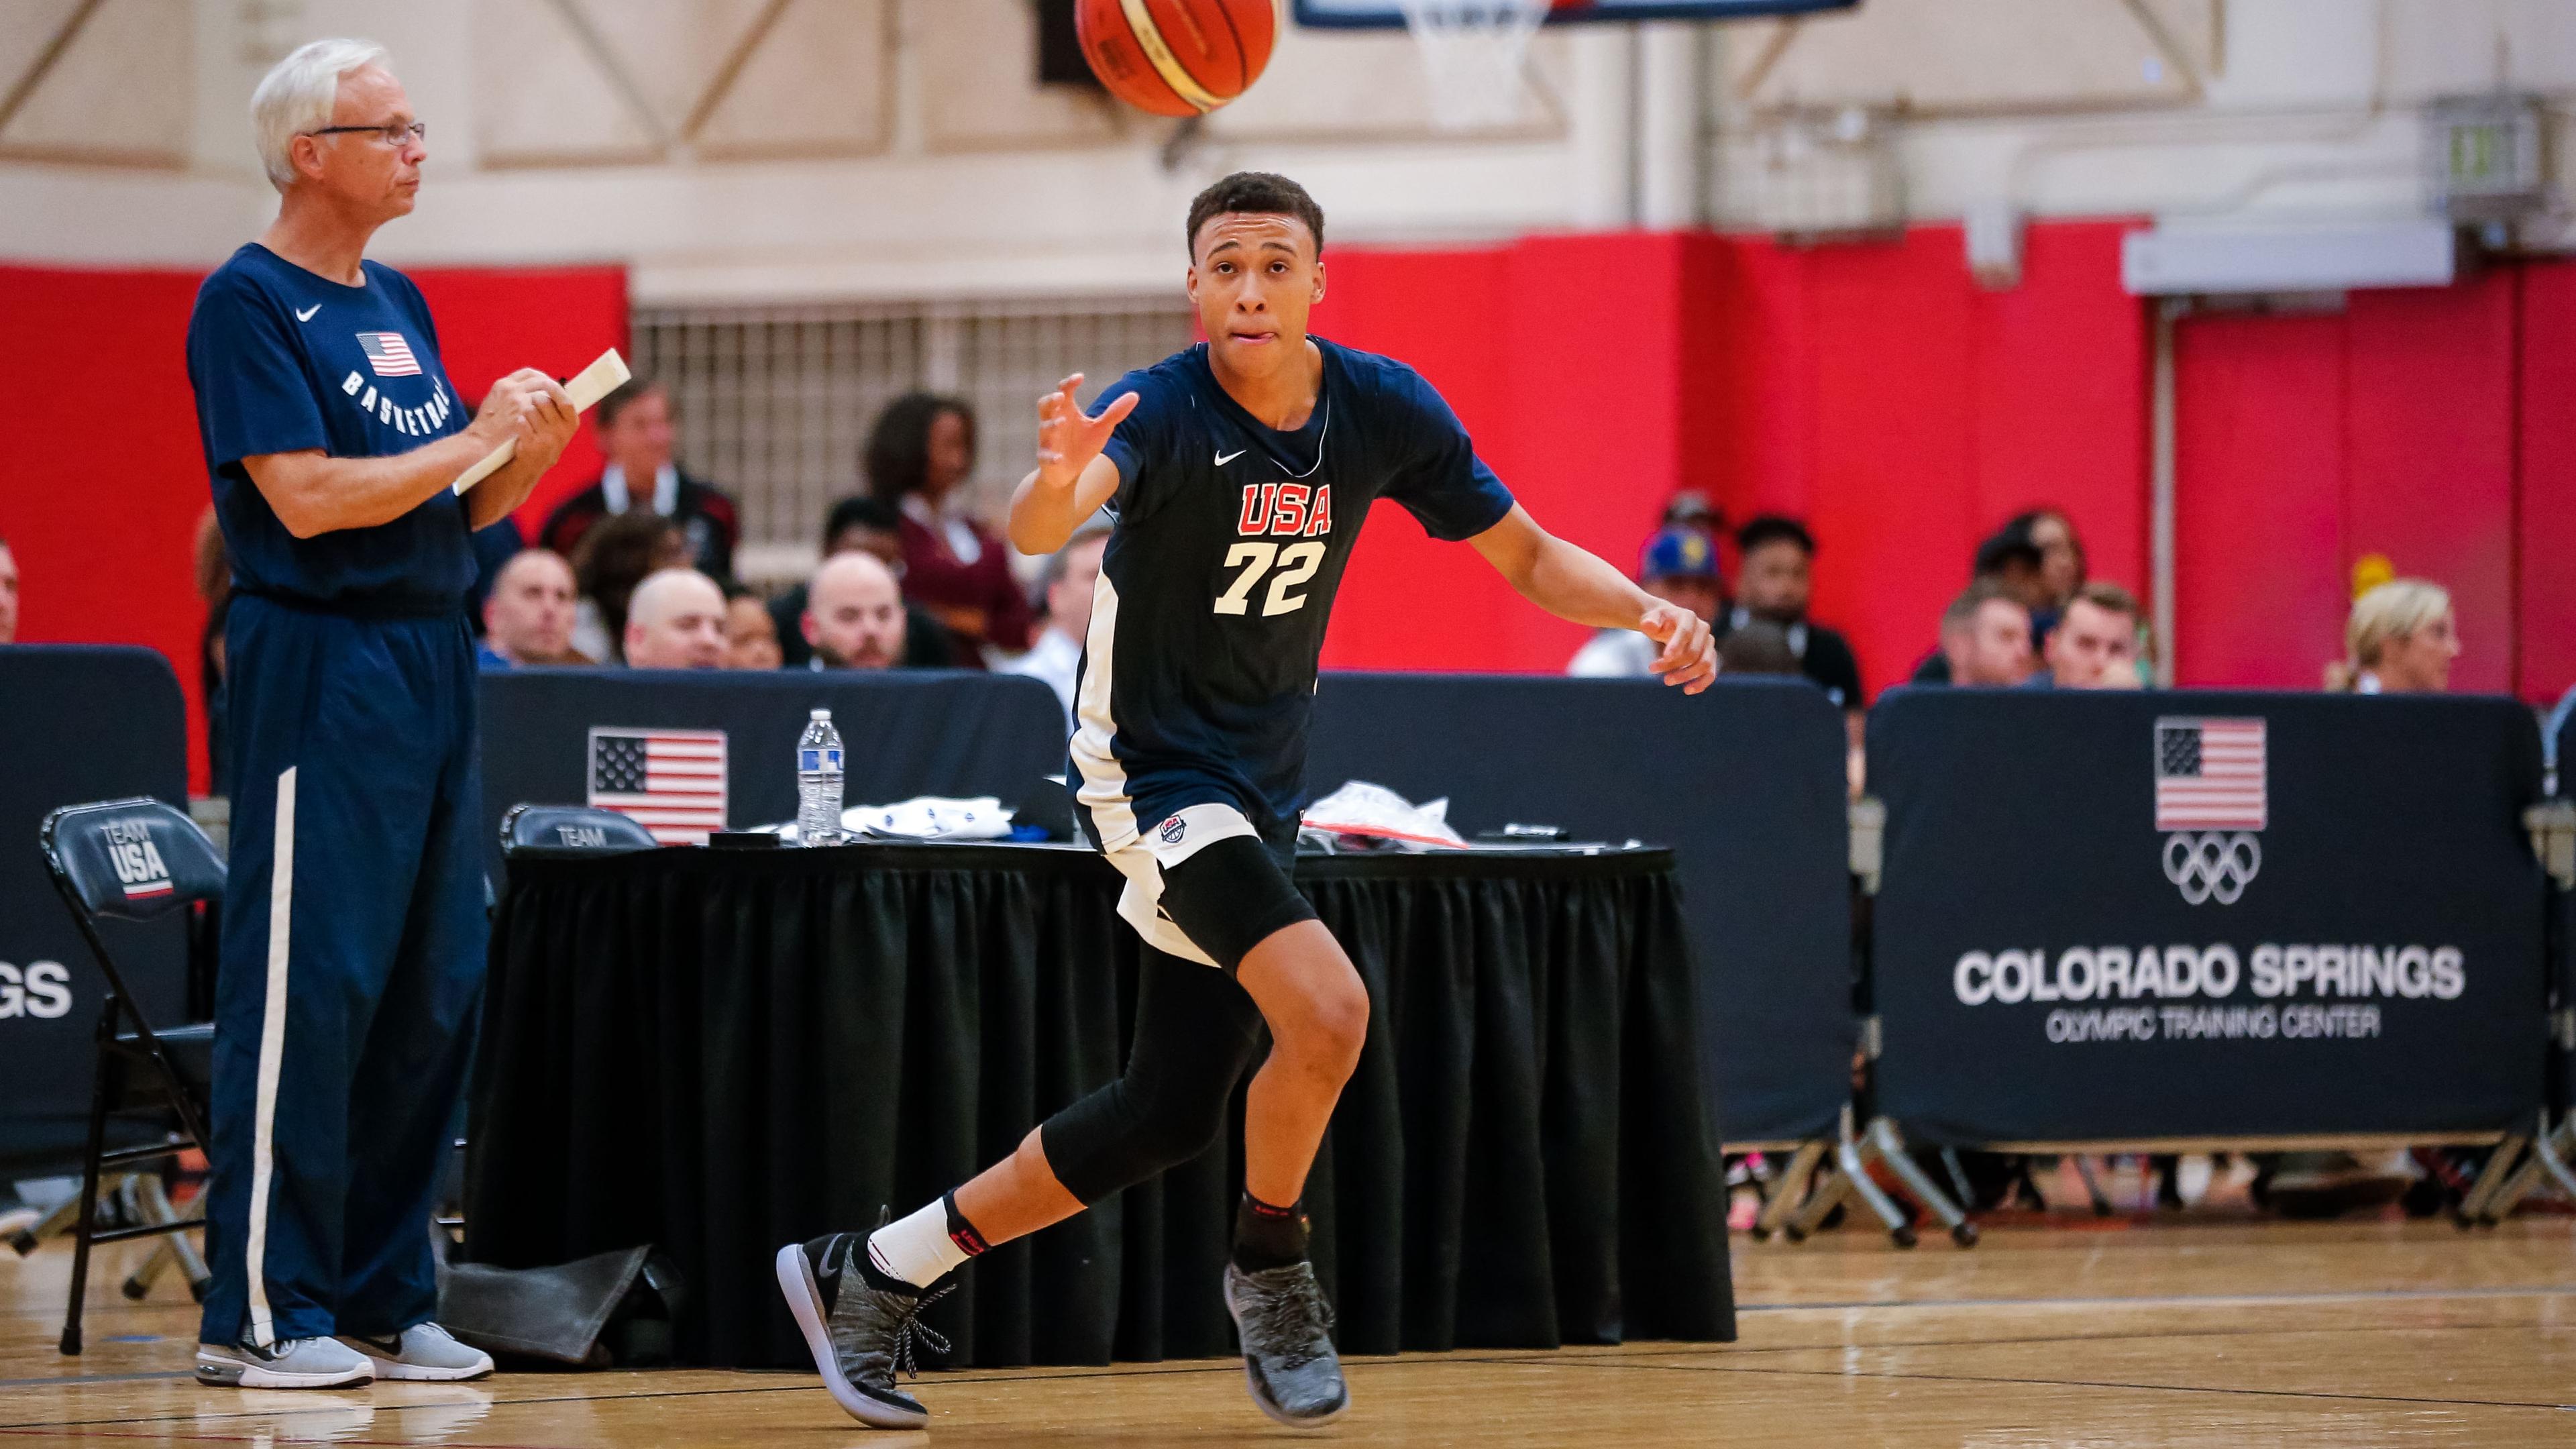 Oct 5, 2018; Colorado Springs, CO, USA; USA Men's Junior National Team participant RJ Hampton (72) during minicamp at the U.S. Olympic Training Center. / Isaiah J. Downing-USA TODAY Sports